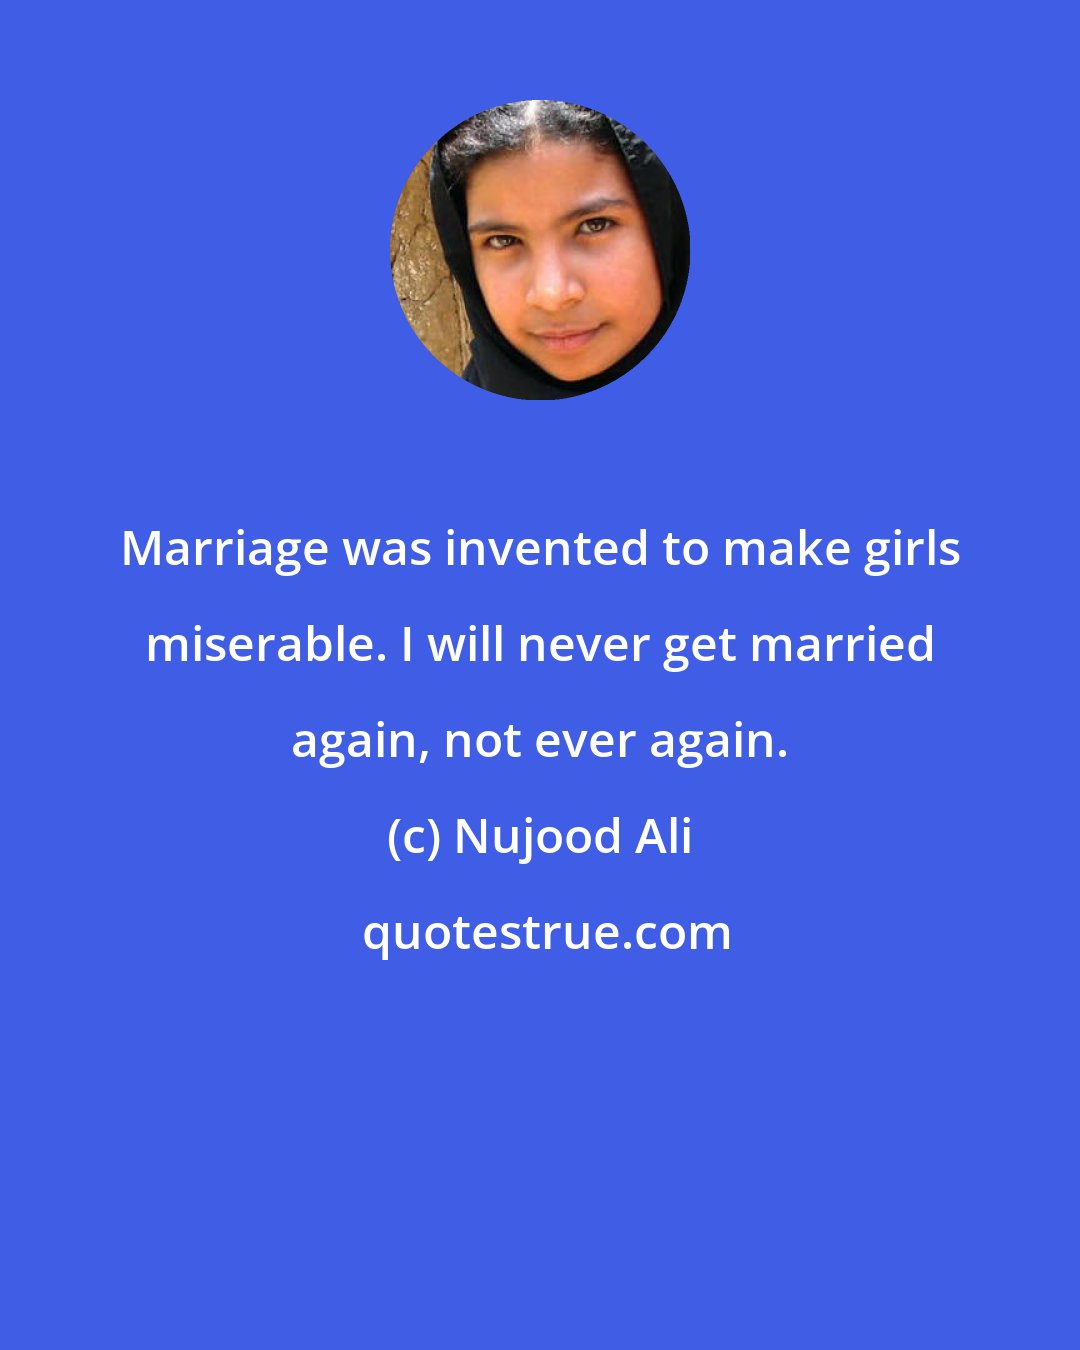 Nujood Ali: Marriage was invented to make girls miserable. I will never get married again, not ever again.